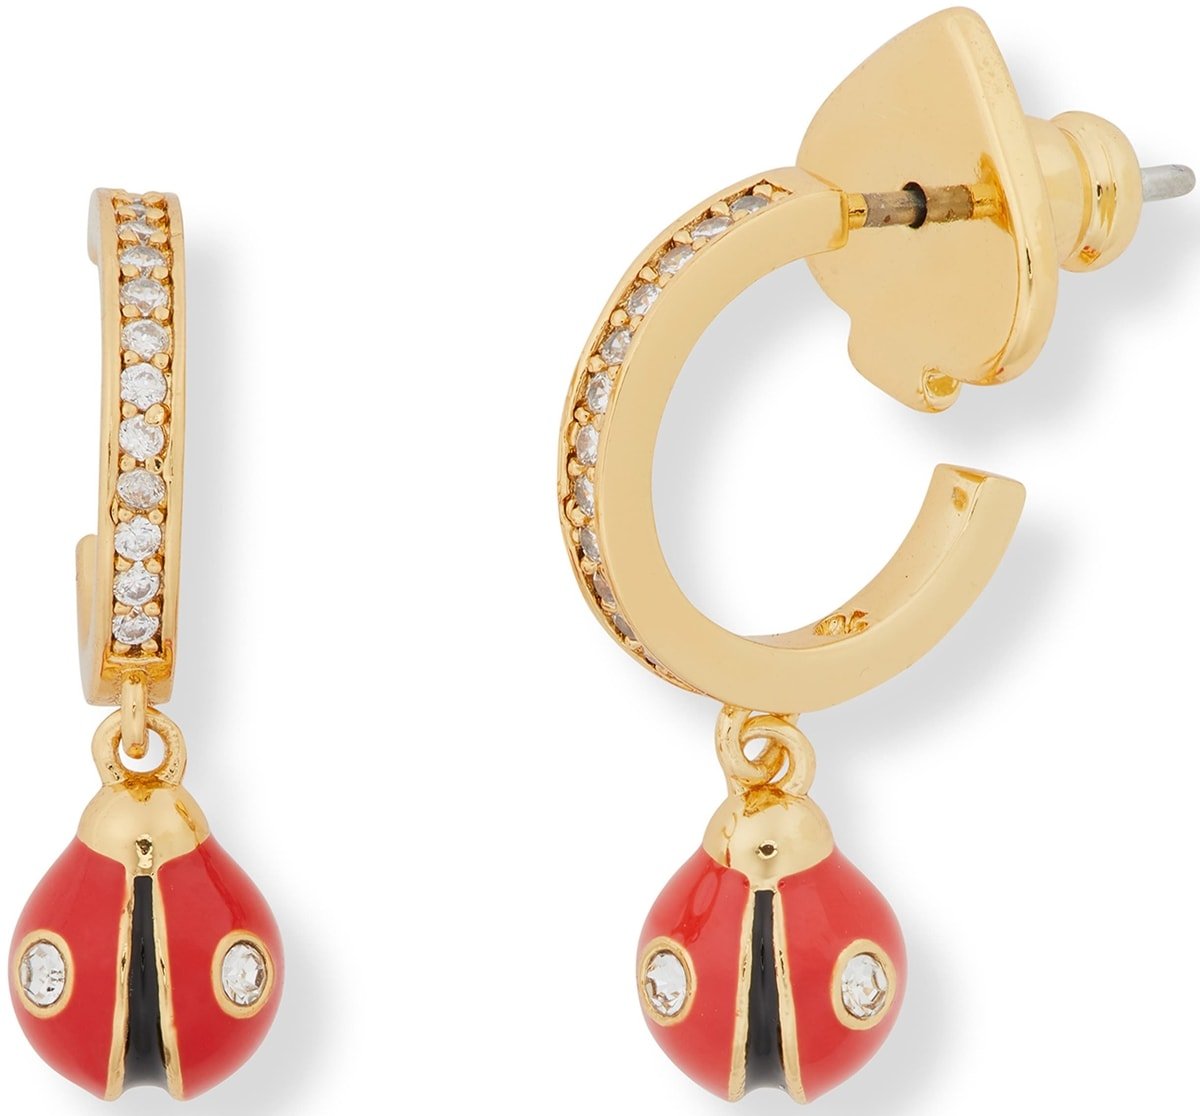 Dainty ladybugs hang from cubic zirconia–lined huggie hoops in these red Kate Spade earrings that make casual ensembles playful